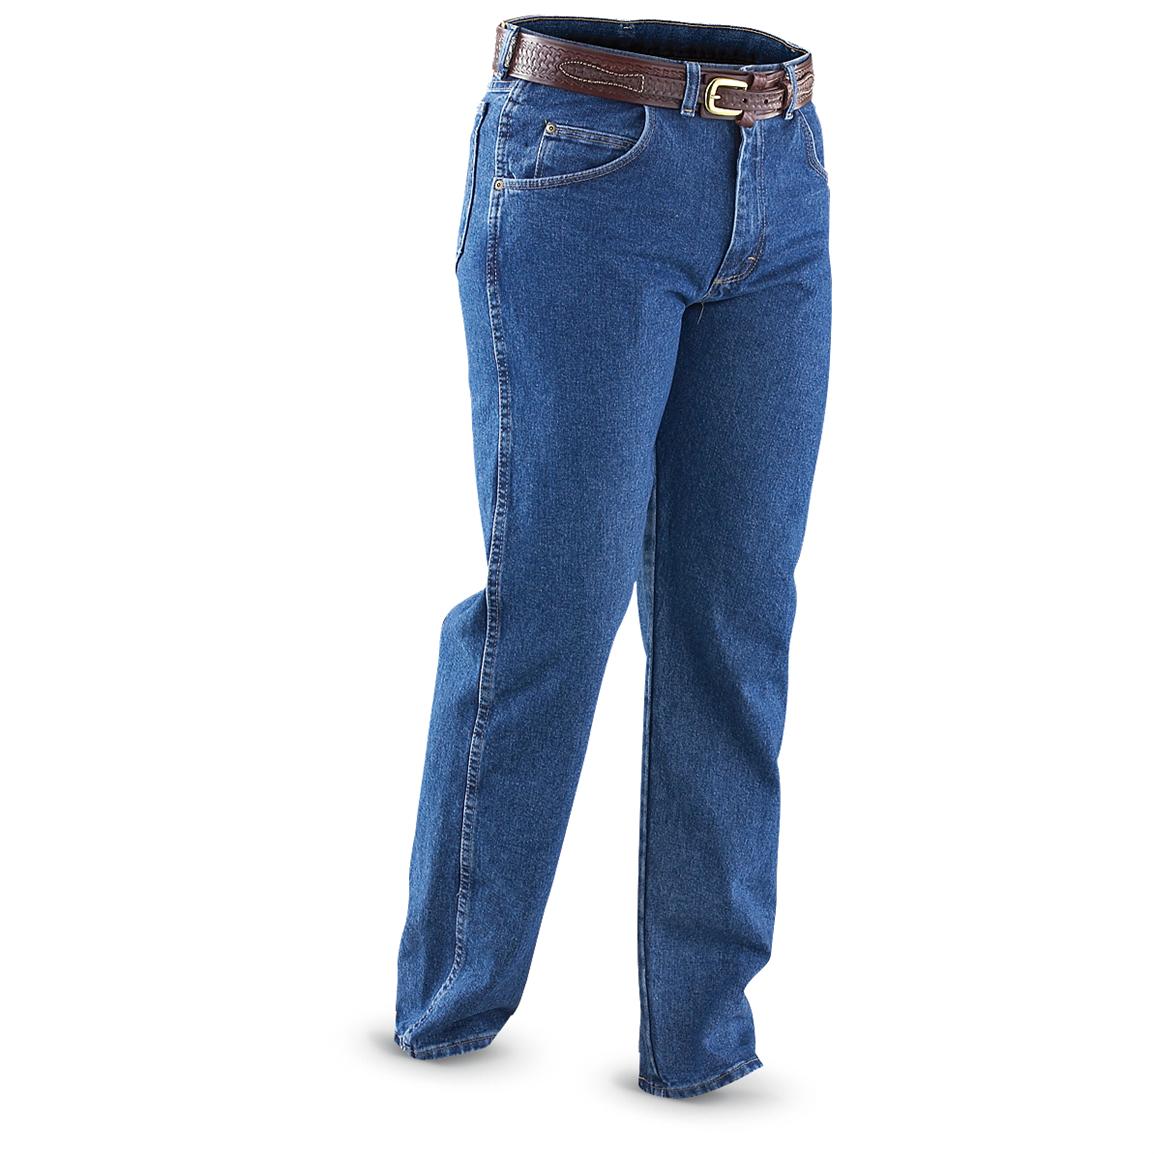 Wrangler® Relaxed - fit Jeans - 221664, Jeans & Pants at Sportsman's Guide